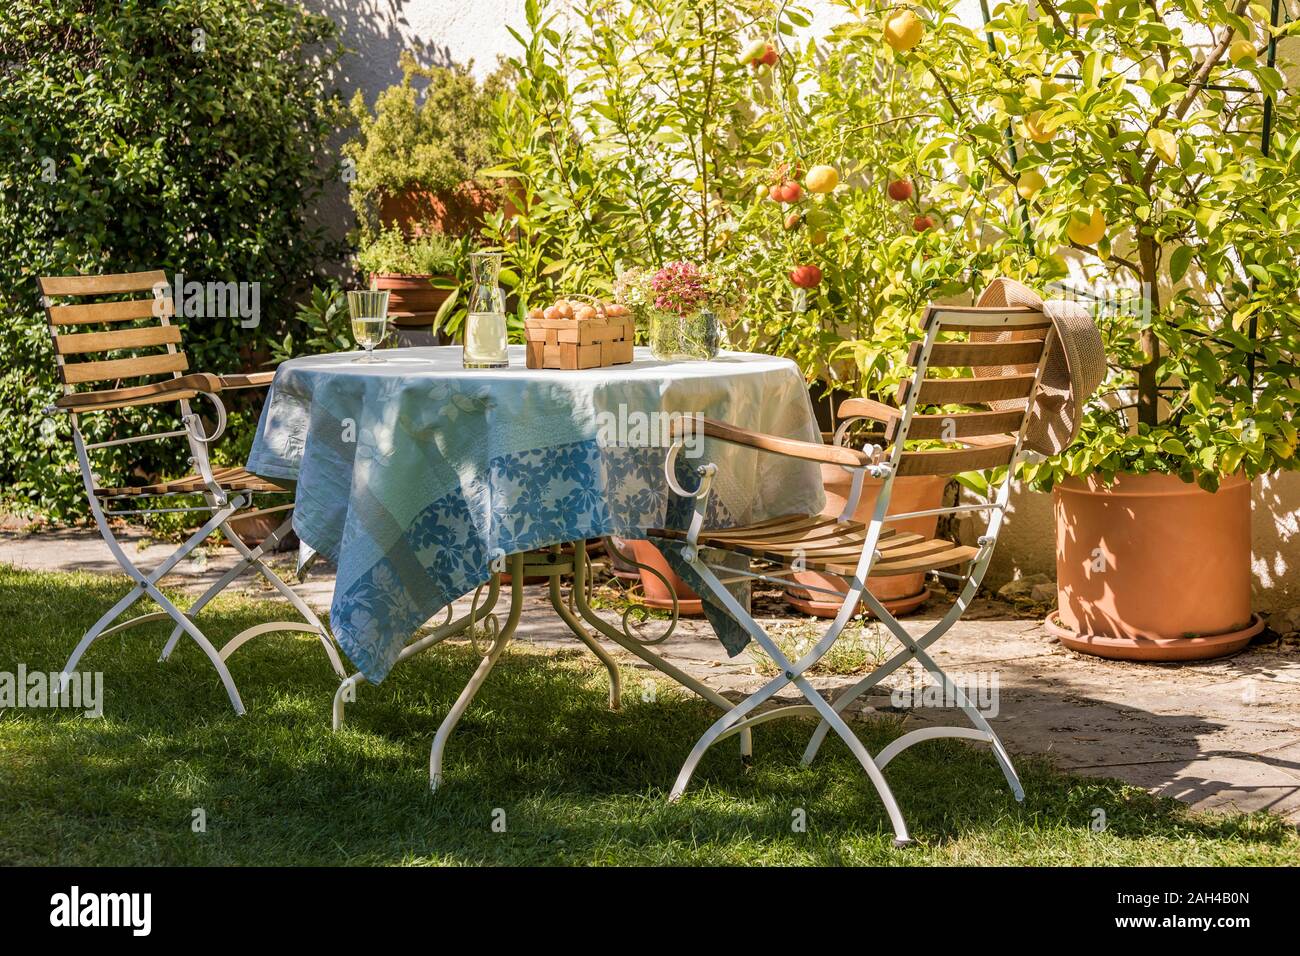 Germany, Baden-Wurttemberg, Stuttgart, Table set in residential garden in front of potted lemons and tomatoes Stock Photo